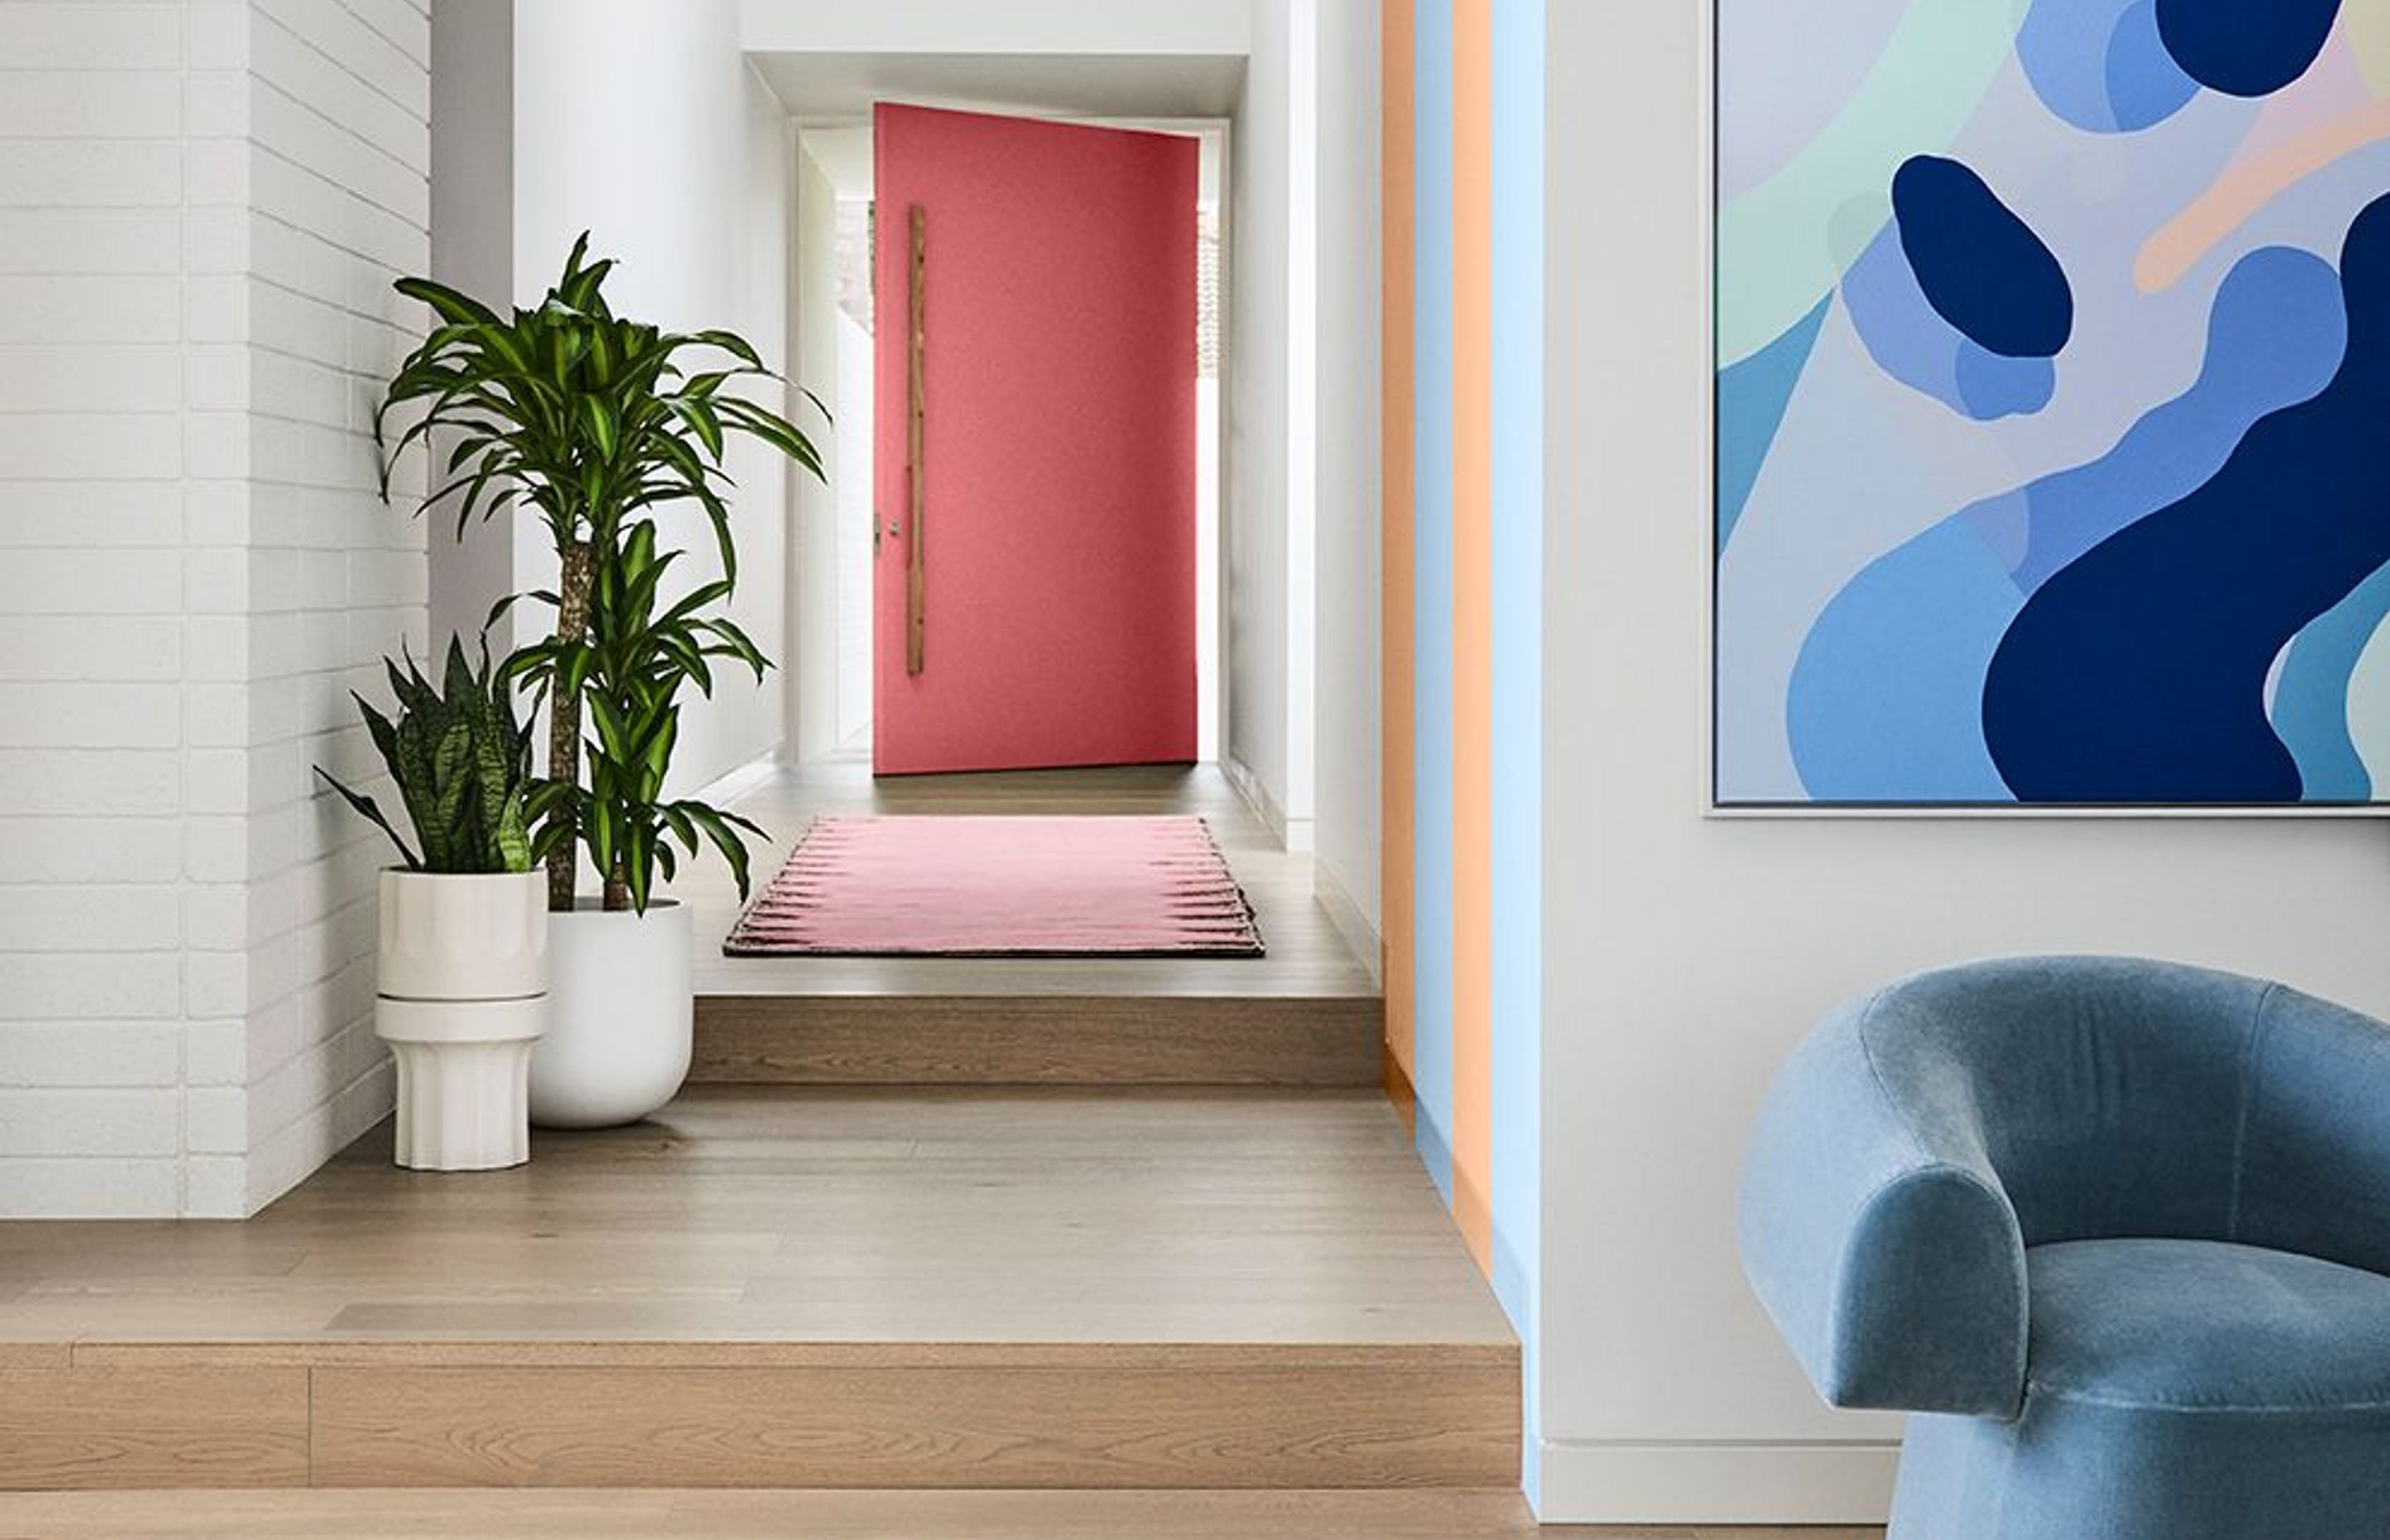 Image supplied by Dulux and features Dulux Ōkārito, stripes in Breezy Half &amp; Herd Street, front door in Ashburton. Artwork: “At Play 2” by Callum Francis. Styling: Bree Leech, Photography: Lisa Cohen.